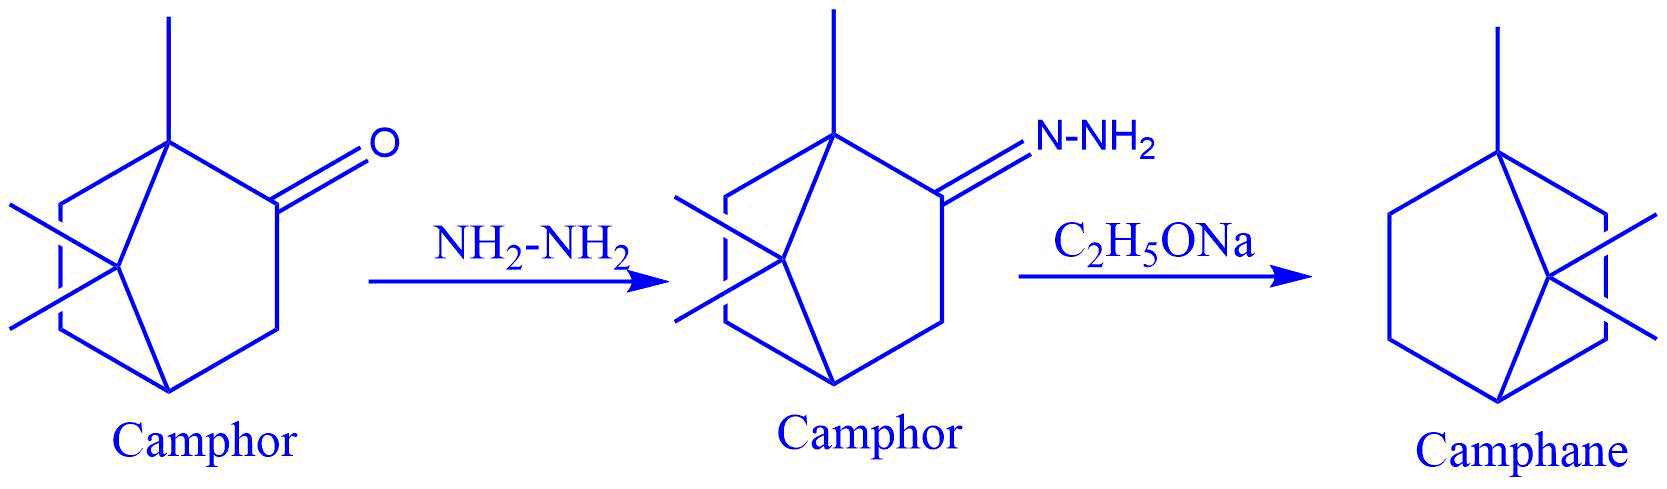 Reduction of camphor to camphane